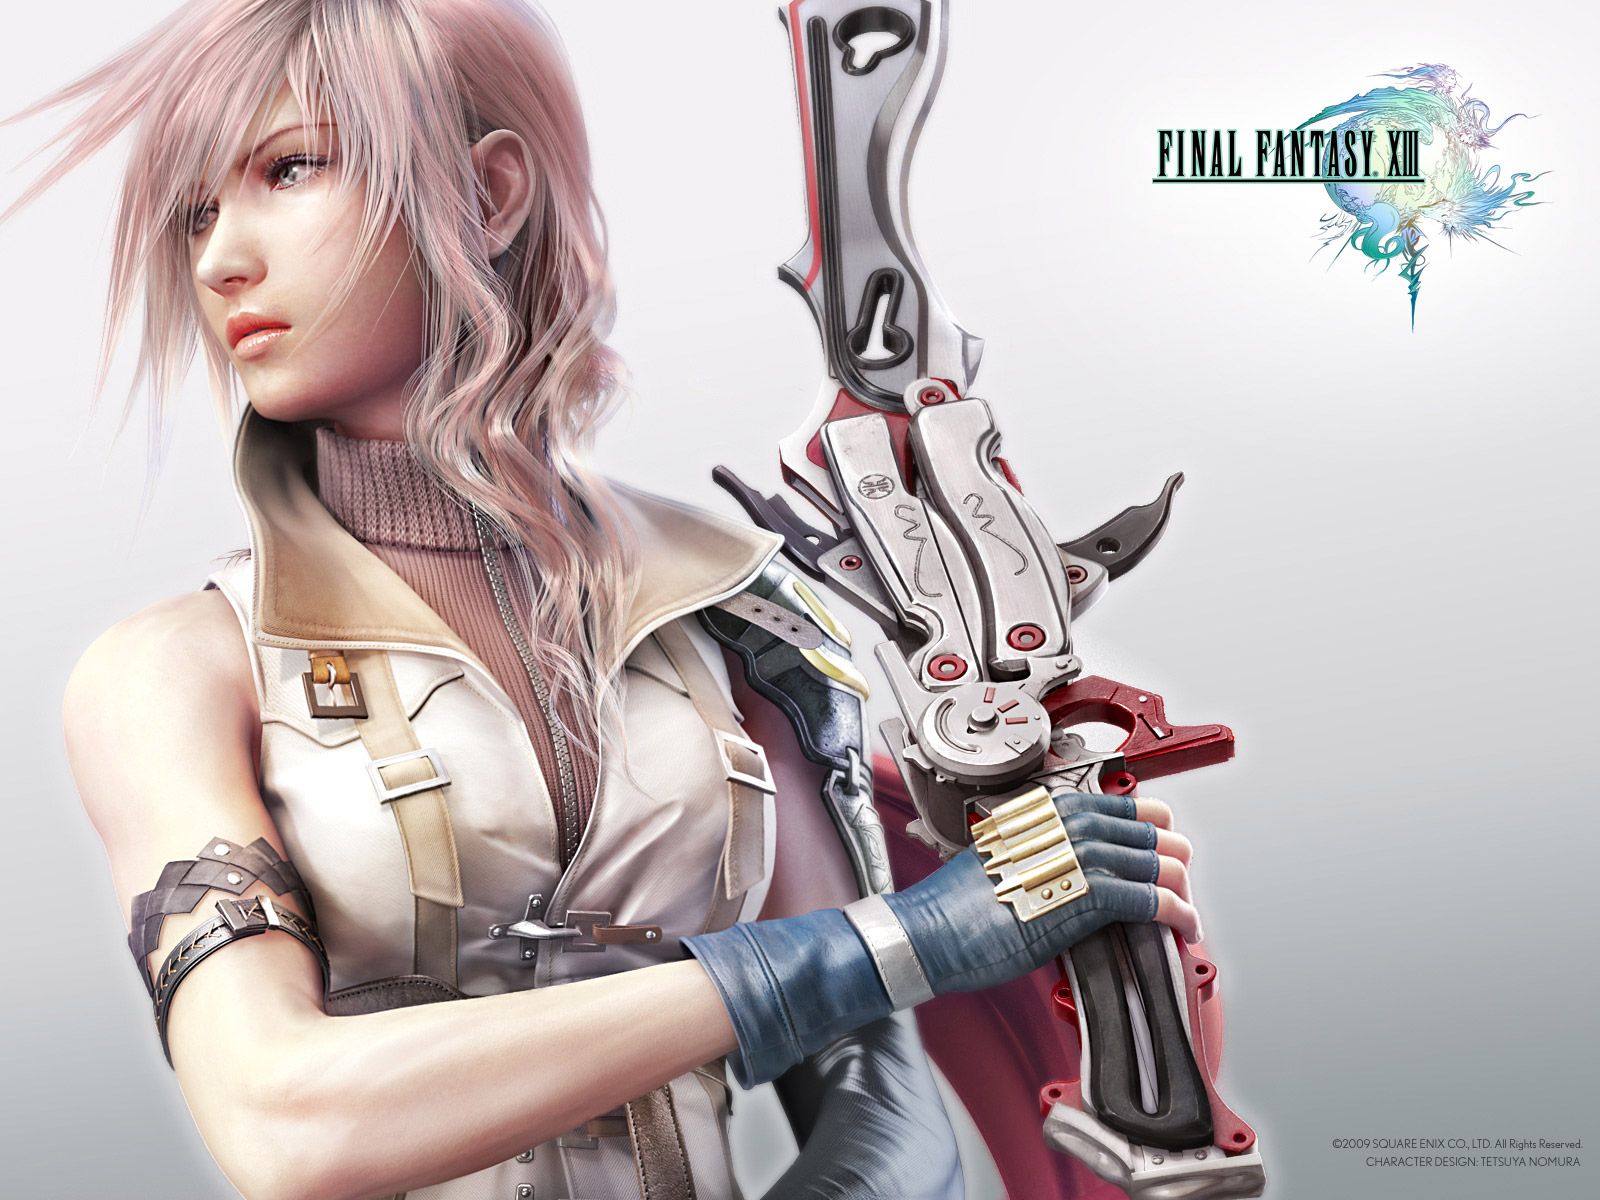 Final Fantasy XIII Game Wallpapers HD Backgrounds